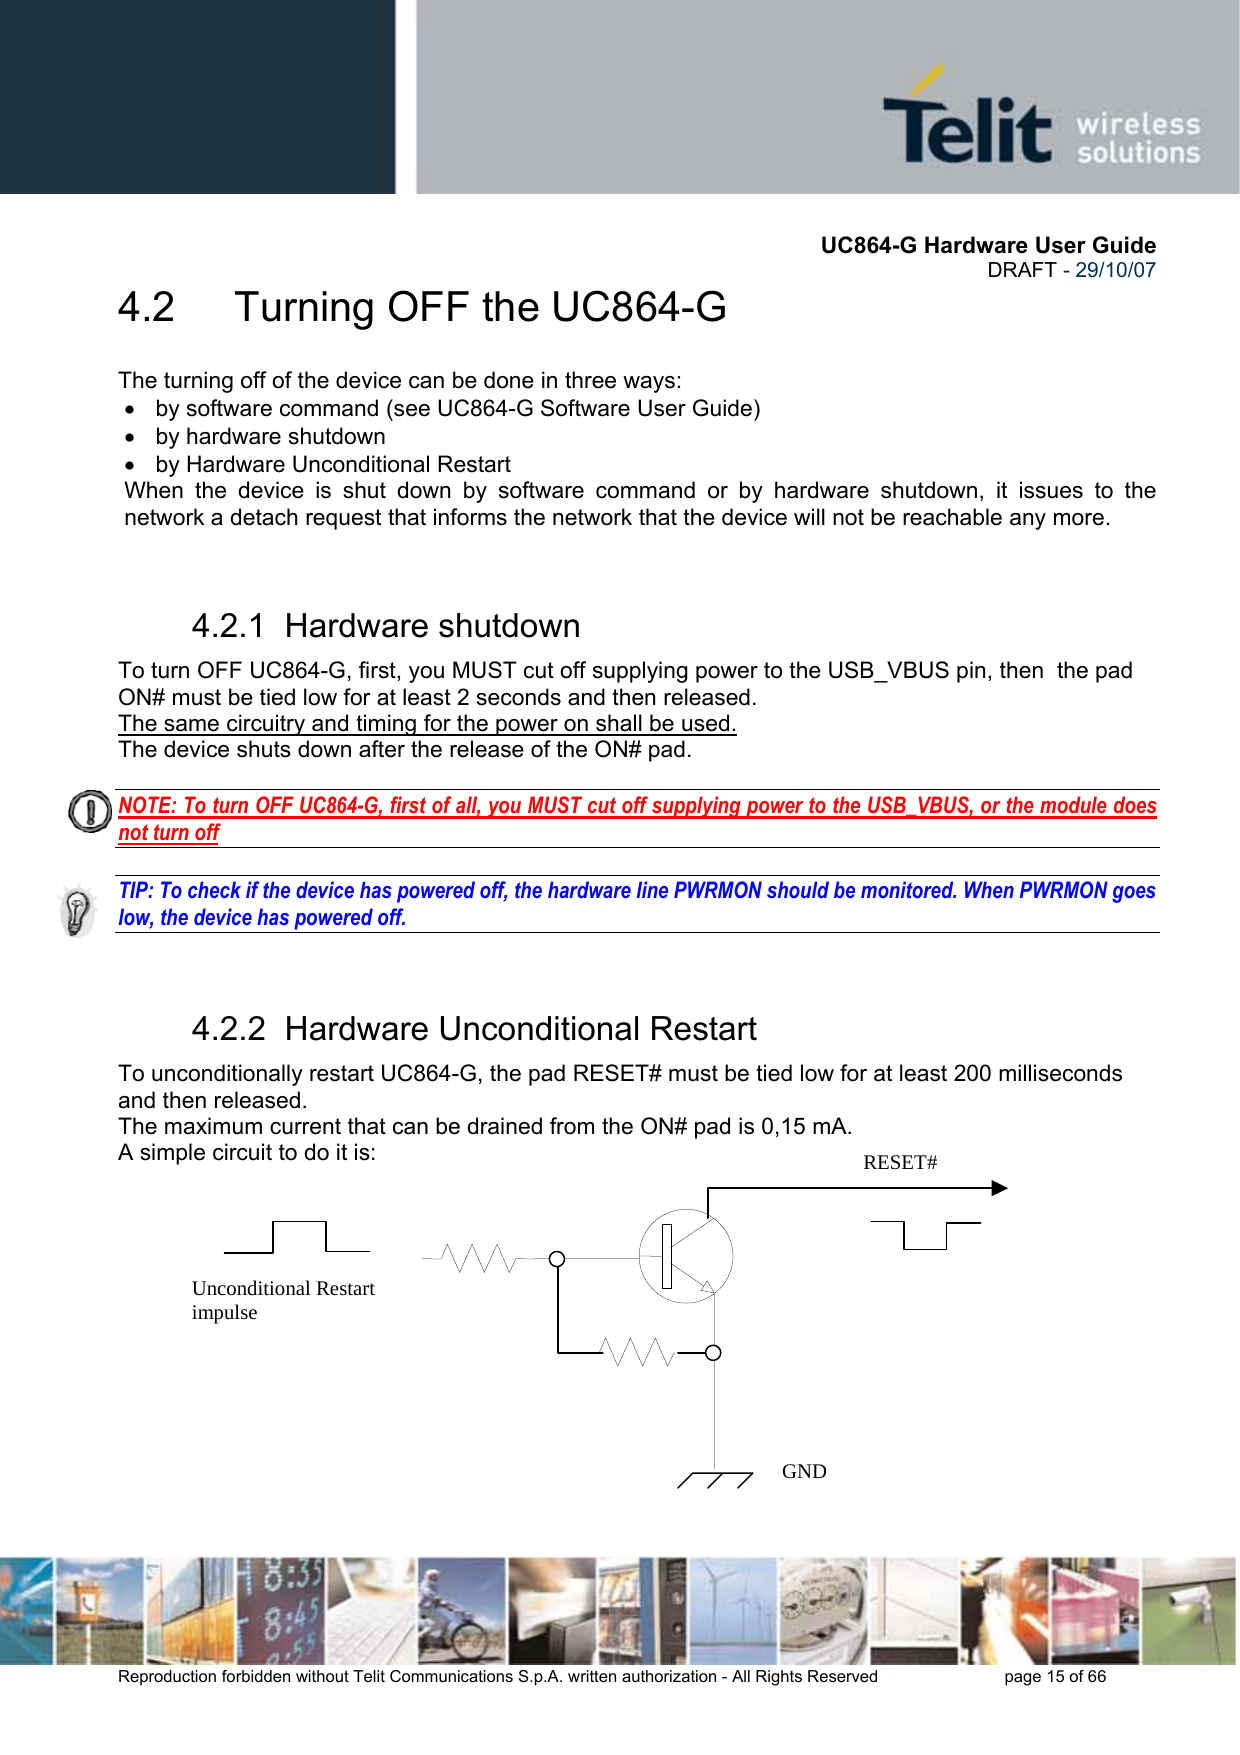       UC864-G Hardware User Guide  DRAFT - 29/10/07      Reproduction forbidden without Telit Communications S.p.A. written authorization - All Rights Reserved    page 15 of 66  4.2   Turning OFF the UC864-G The turning off of the device can be done in three ways: •  by software command (see UC864-G Software User Guide) •  by hardware shutdown •  by Hardware Unconditional Restart When the device is shut down by software command or by hardware shutdown, it issues to the network a detach request that informs the network that the device will not be reachable any more.   4.2.1  Hardware shutdown To turn OFF UC864-G, first, you MUST cut off supplying power to the USB_VBUS pin, then  the pad ON# must be tied low for at least 2 seconds and then released. The same circuitry and timing for the power on shall be used. The device shuts down after the release of the ON# pad.  NOTE: To turn OFF UC864-G, first of all, you MUST cut off supplying power to the USB_VBUS, or the module does not turn off  TIP: To check if the device has powered off, the hardware line PWRMON should be monitored. When PWRMON goes low, the device has powered off.  4.2.2  Hardware Unconditional Restart To unconditionally restart UC864-G, the pad RESET# must be tied low for at least 200 milliseconds and then released. The maximum current that can be drained from the ON# pad is 0,15 mA. A simple circuit to do it is:              RESET# Unconditional Restart impulse   GND